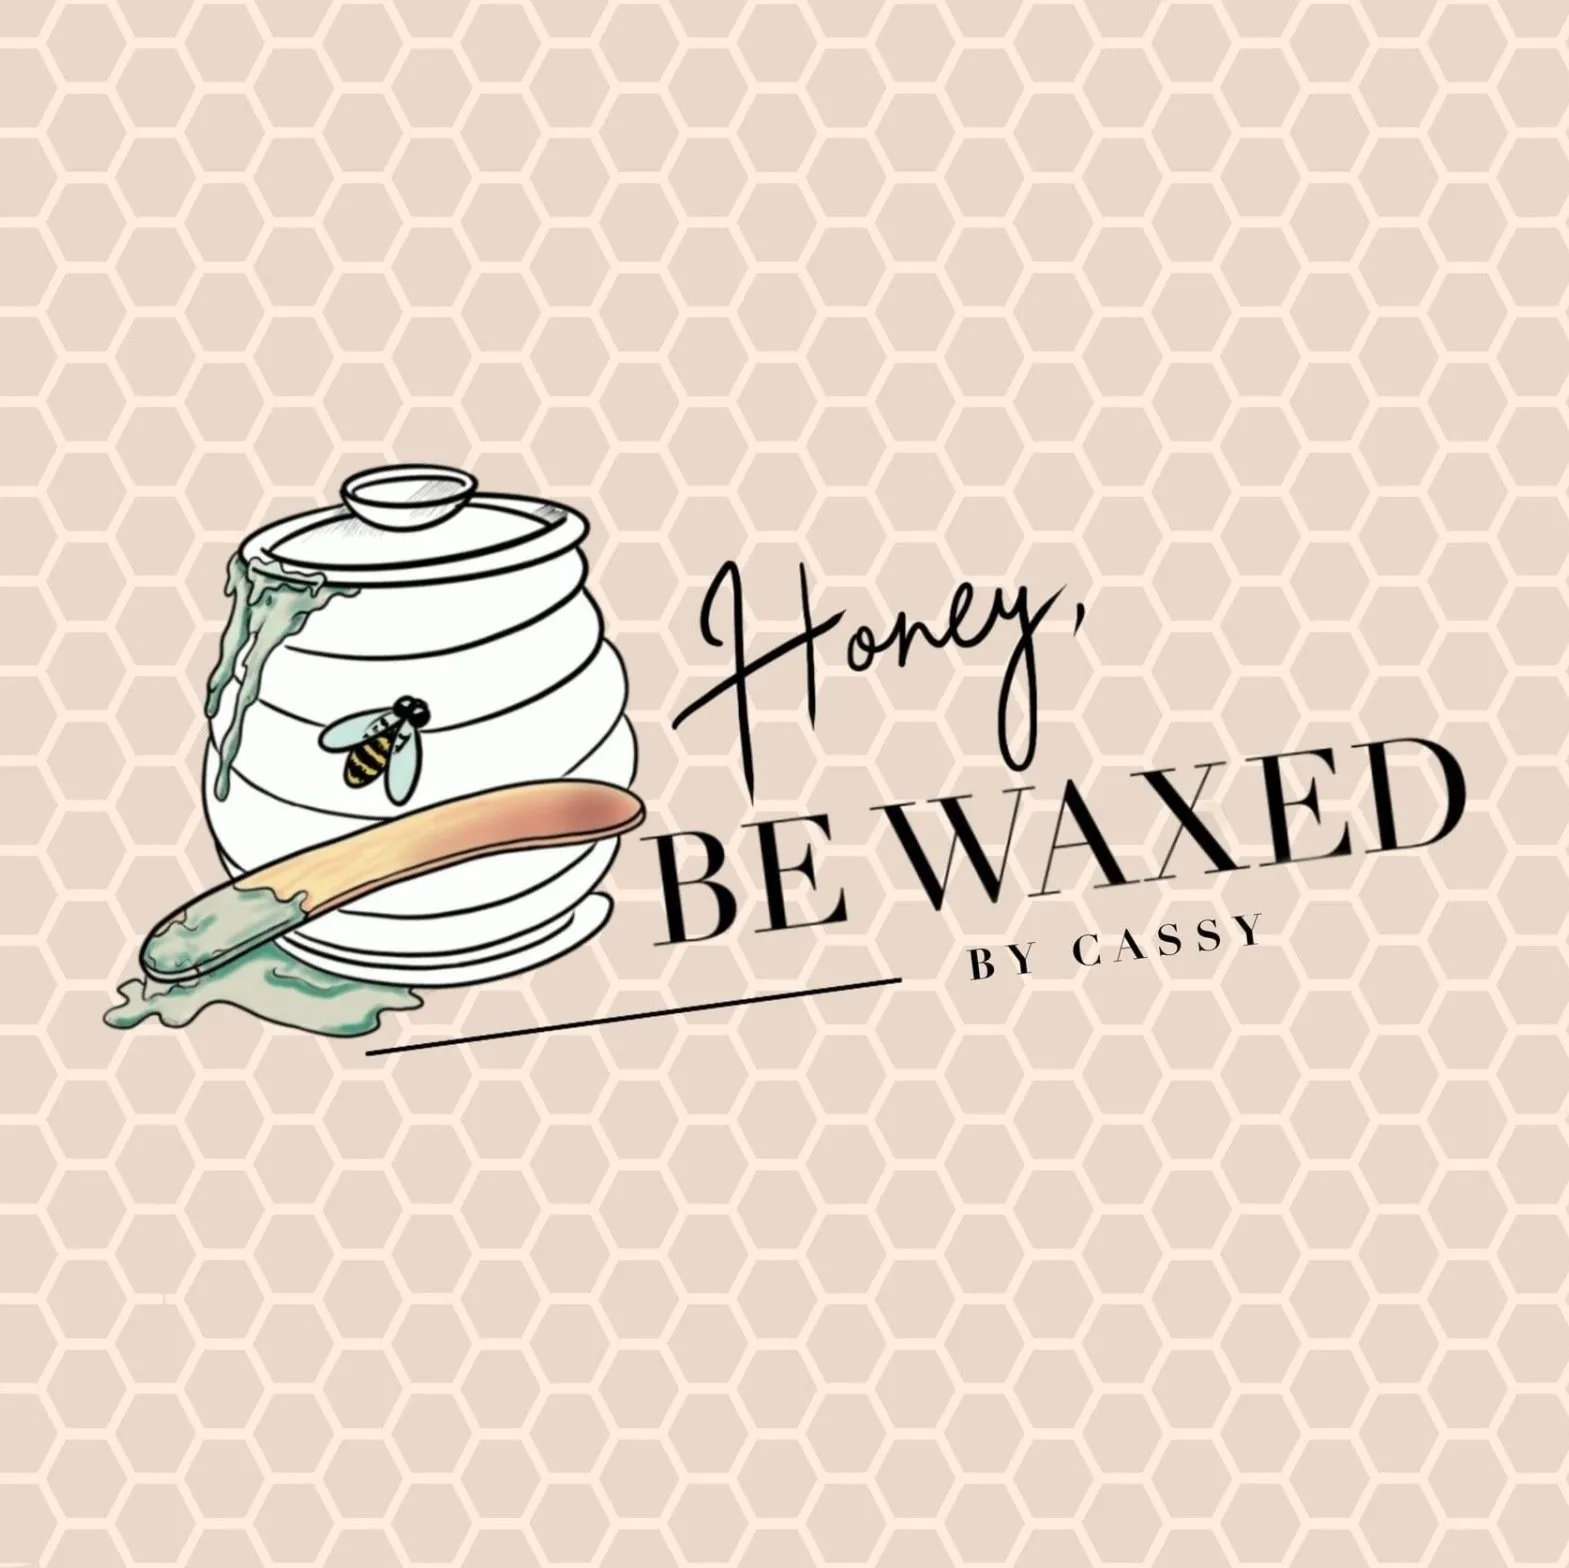 A logo for honey be waxed by cassy with a jar of honey and a bee on a honeycomb background.